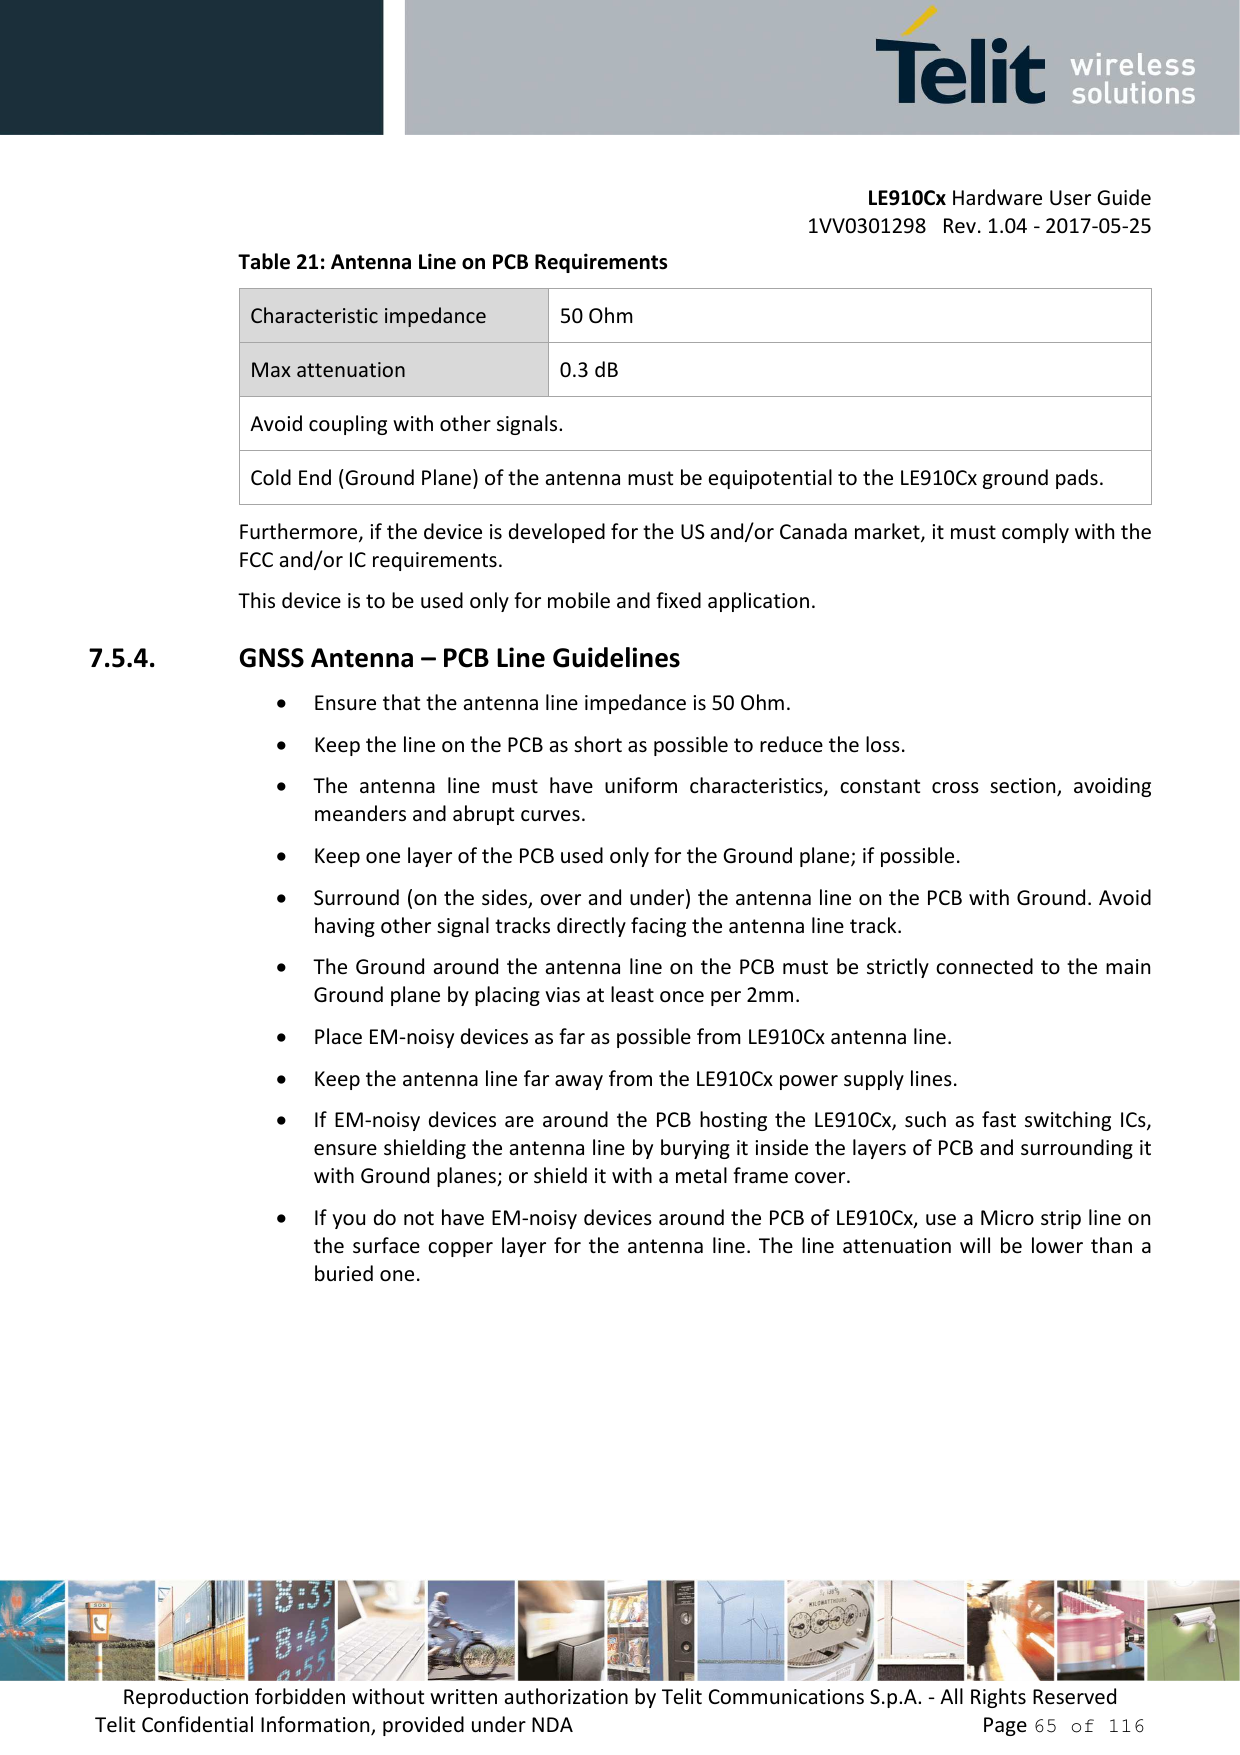         LE910Cx Hardware User Guide 1VV0301298   Rev. 1.04 - 2017-05-25 Reproduction forbidden without written authorization by Telit Communications S.p.A. - All Rights Reserved Telit Confidential Information, provided under NDA                 Page 65 of 116 Table 21: Antenna Line on PCB Requirements Characteristic impedance  50 Ohm Max attenuation  0.3 dB Avoid coupling with other signals. Cold End (Ground Plane) of the antenna must be equipotential to the LE910Cx ground pads. Furthermore, if the device is developed for the US and/or Canada market, it must comply with the FCC and/or IC requirements. This device is to be used only for mobile and fixed application.   7.5.4. GNSS Antenna – PCB Line Guidelines • Ensure that the antenna line impedance is 50 Ohm. • Keep the line on the PCB as short as possible to reduce the loss. • The  antenna  line  must  have  uniform  characteristics,  constant  cross  section,  avoiding meanders and abrupt curves. • Keep one layer of the PCB used only for the Ground plane; if possible. • Surround (on the sides, over and under) the antenna line on the PCB with Ground. Avoid having other signal tracks directly facing the antenna line track. • The Ground around the antenna line on the PCB must be strictly connected to the main Ground plane by placing vias at least once per 2mm. • Place EM-noisy devices as far as possible from LE910Cx antenna line. • Keep the antenna line far away from the LE910Cx power supply lines.  • If EM-noisy devices are around the PCB hosting the LE910Cx, such  as fast switching ICs, ensure shielding the antenna line by burying it inside the layers of PCB and surrounding it with Ground planes; or shield it with a metal frame cover. • If you do not have EM-noisy devices around the PCB of LE910Cx, use a Micro strip line on the surface copper layer for the antenna  line. The  line attenuation will  be lower than a buried one.   